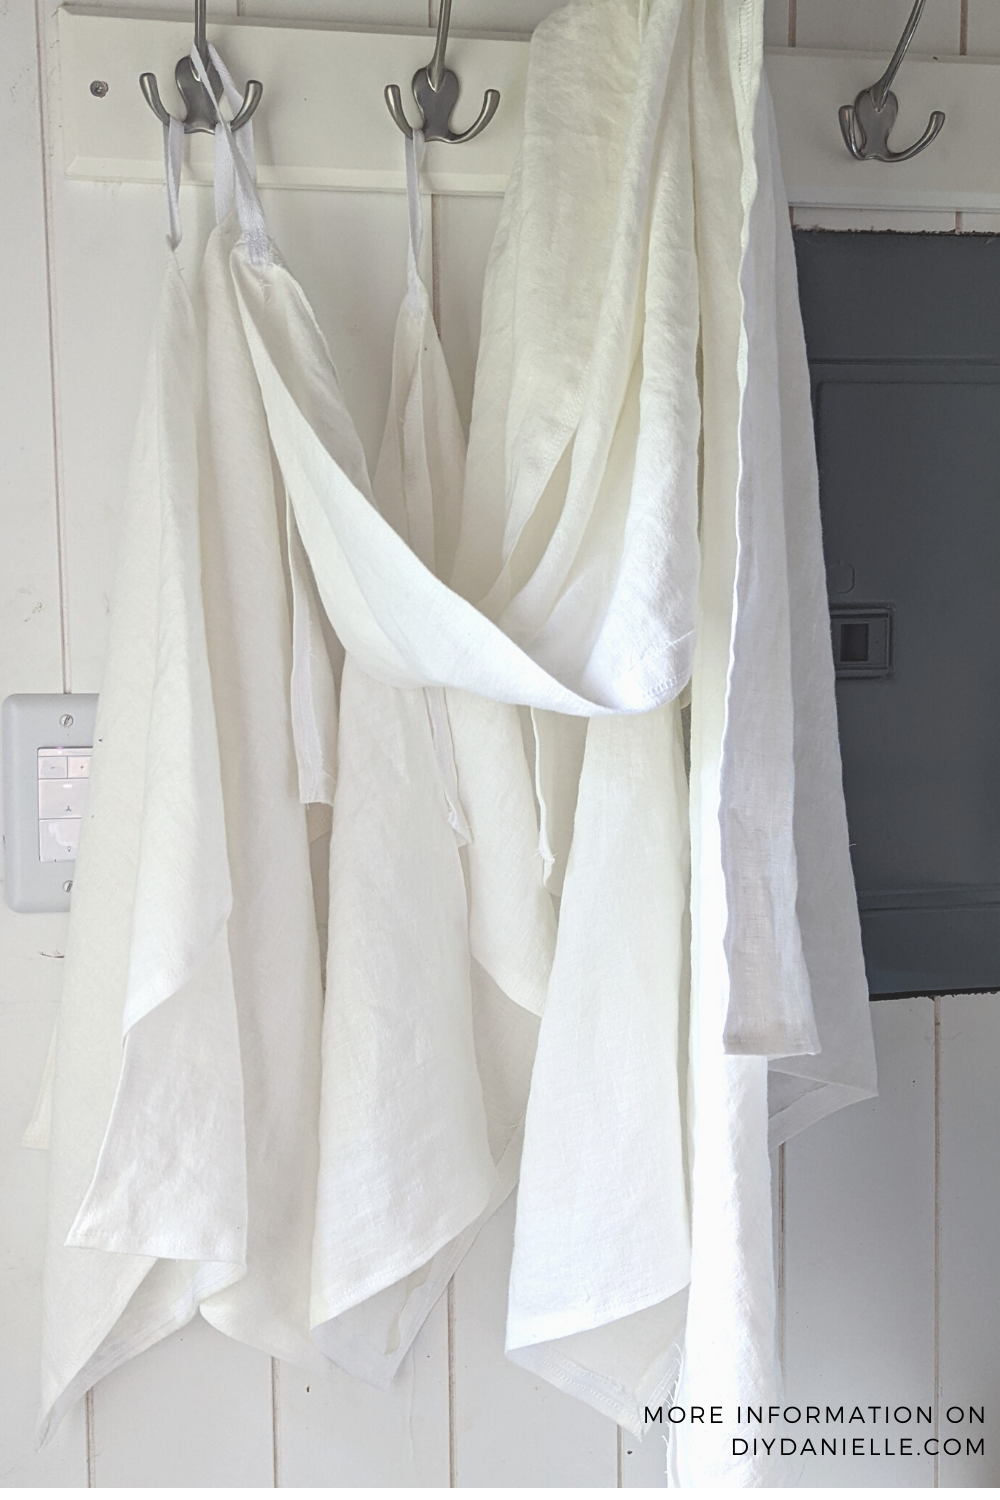 White Linen Towels: Bath Towels and Hand Towels